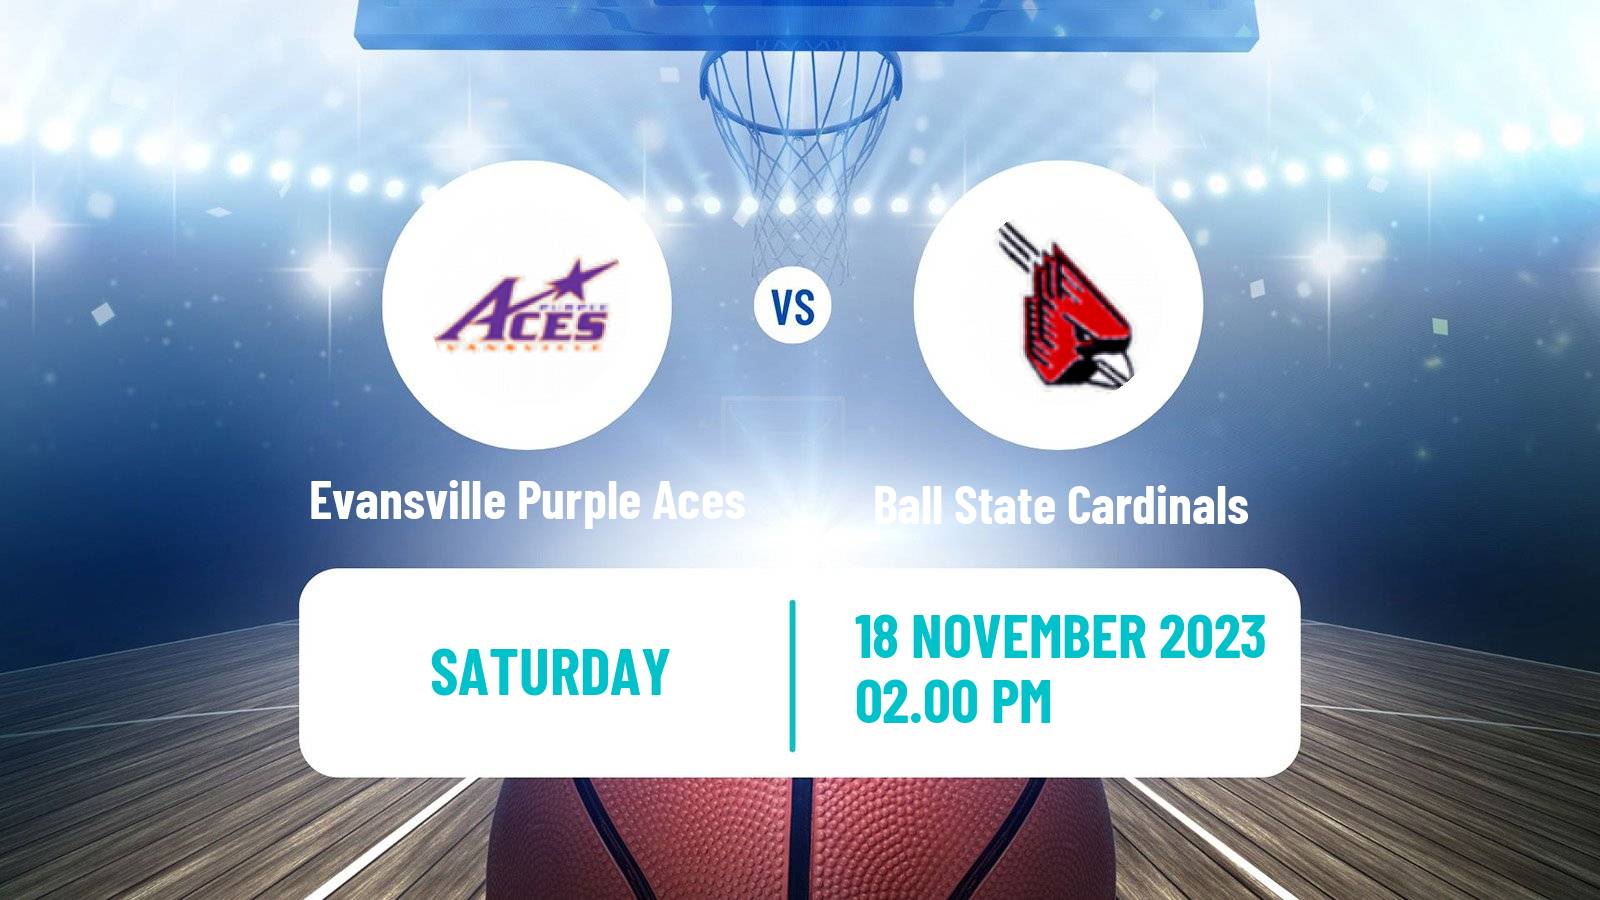 Basketball NCAA College Basketball Evansville Purple Aces - Ball State Cardinals